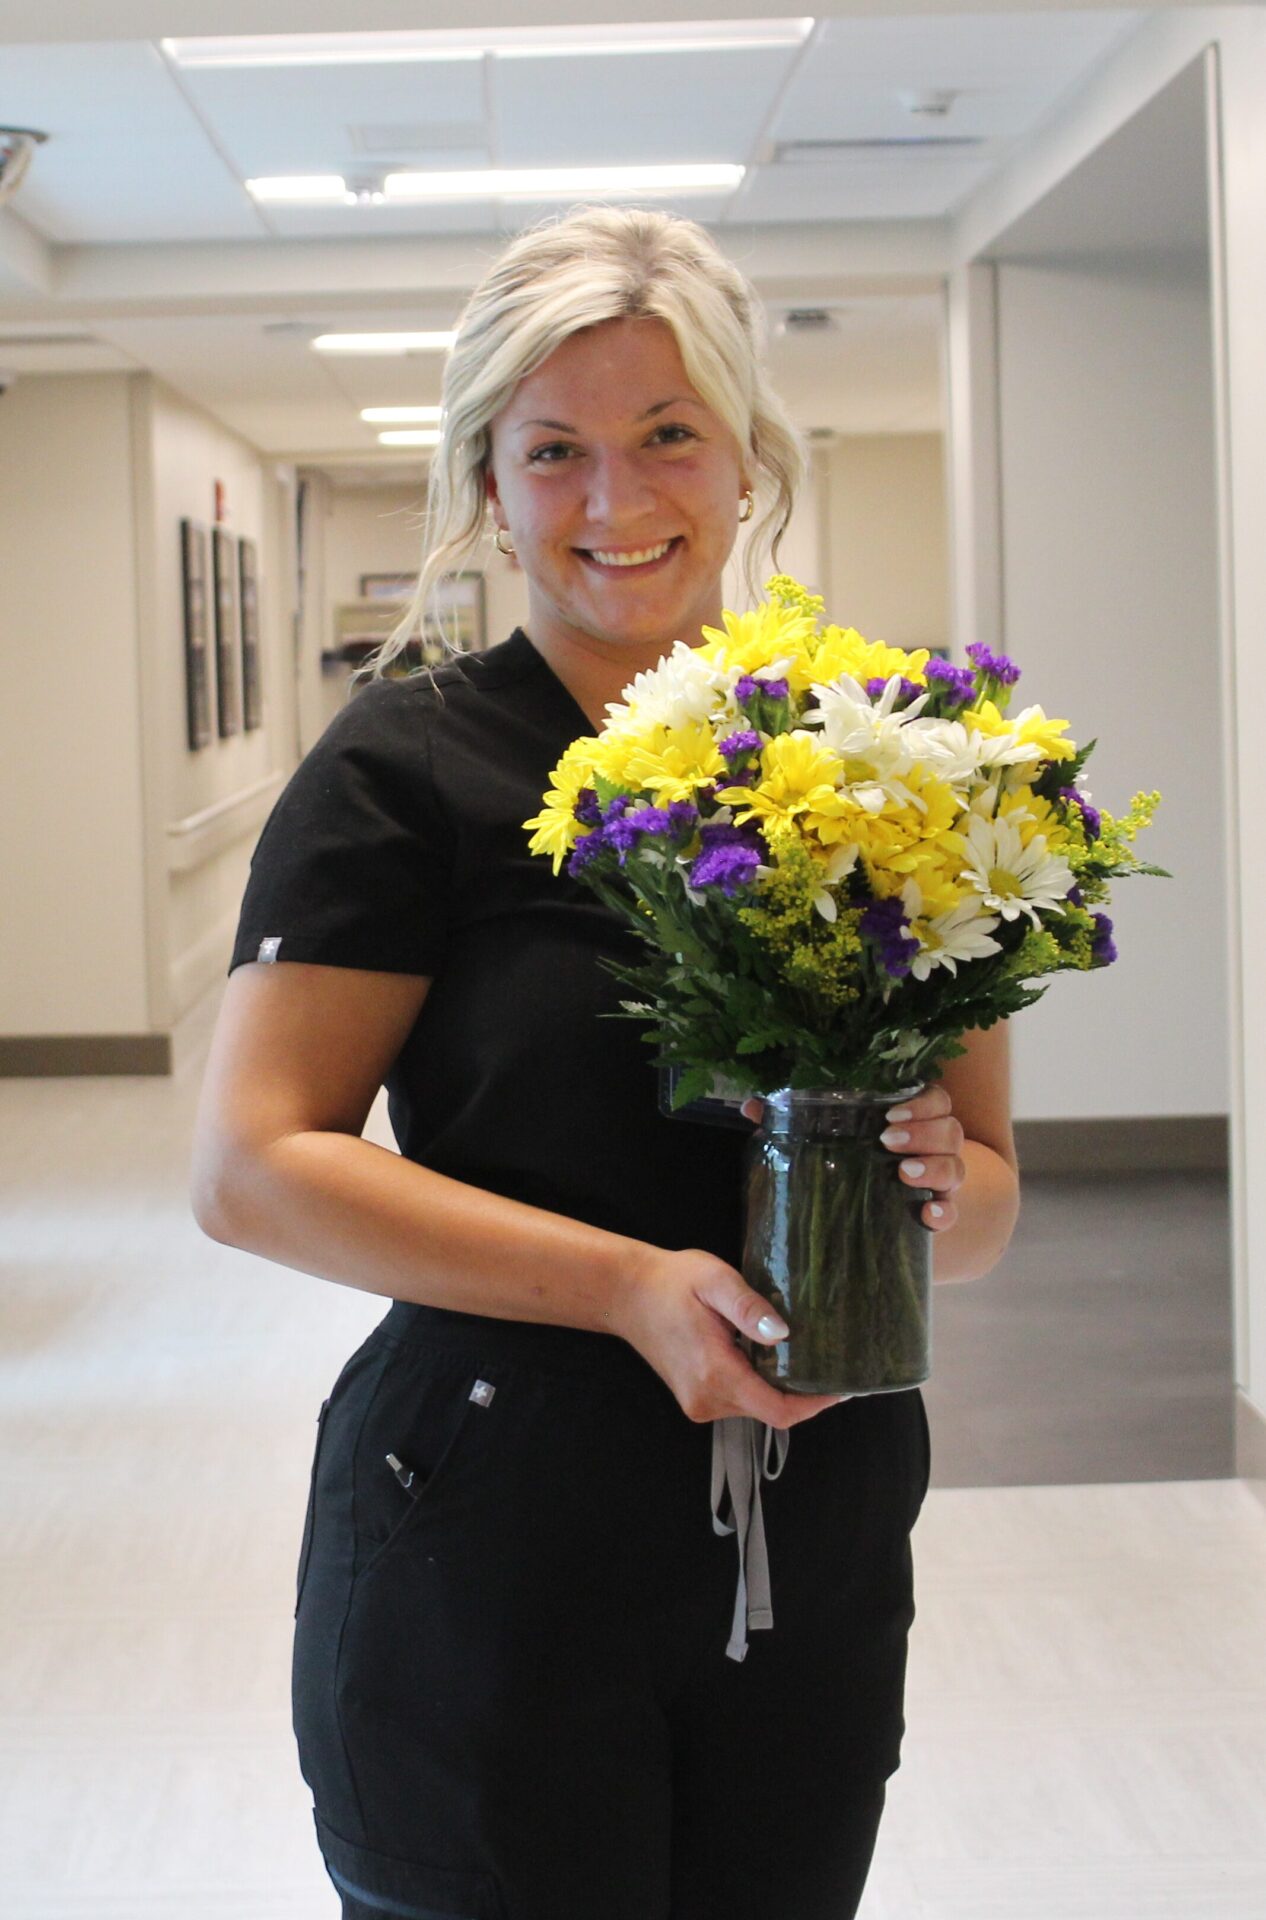 Brianna pictured holding her beautiful DAISY bouquet.